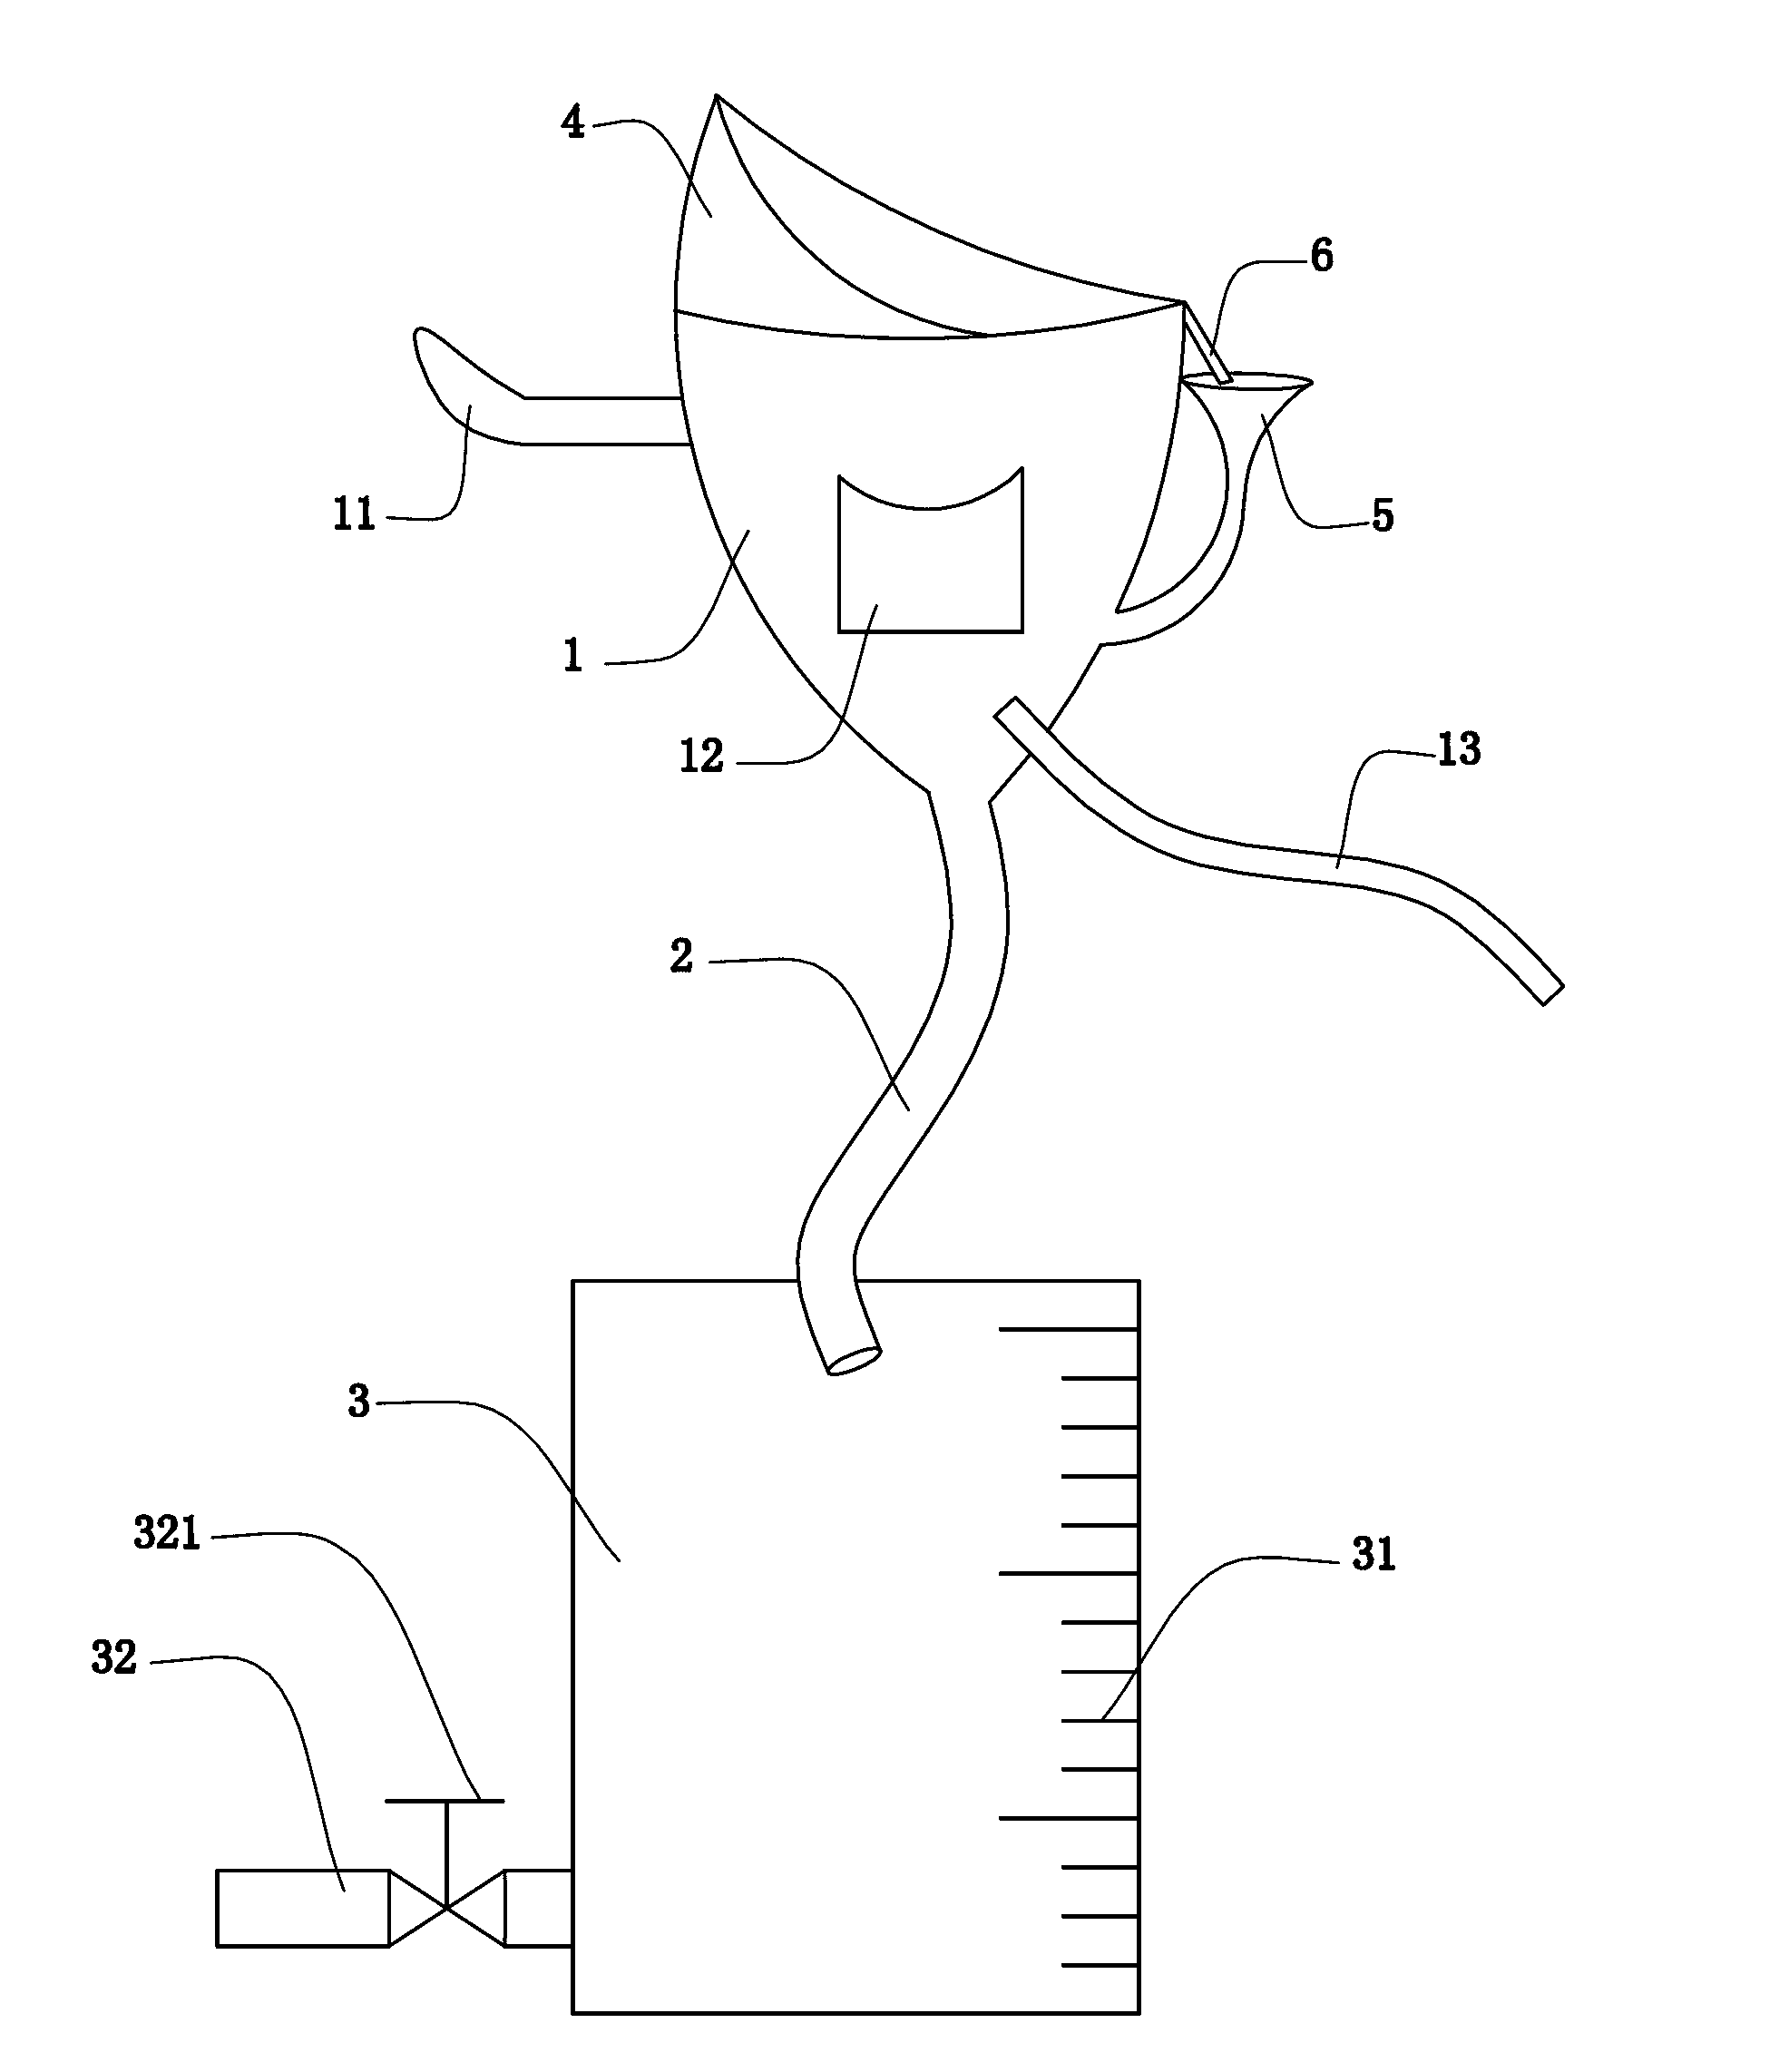 Urinary catheterization device for obstetrical nursing